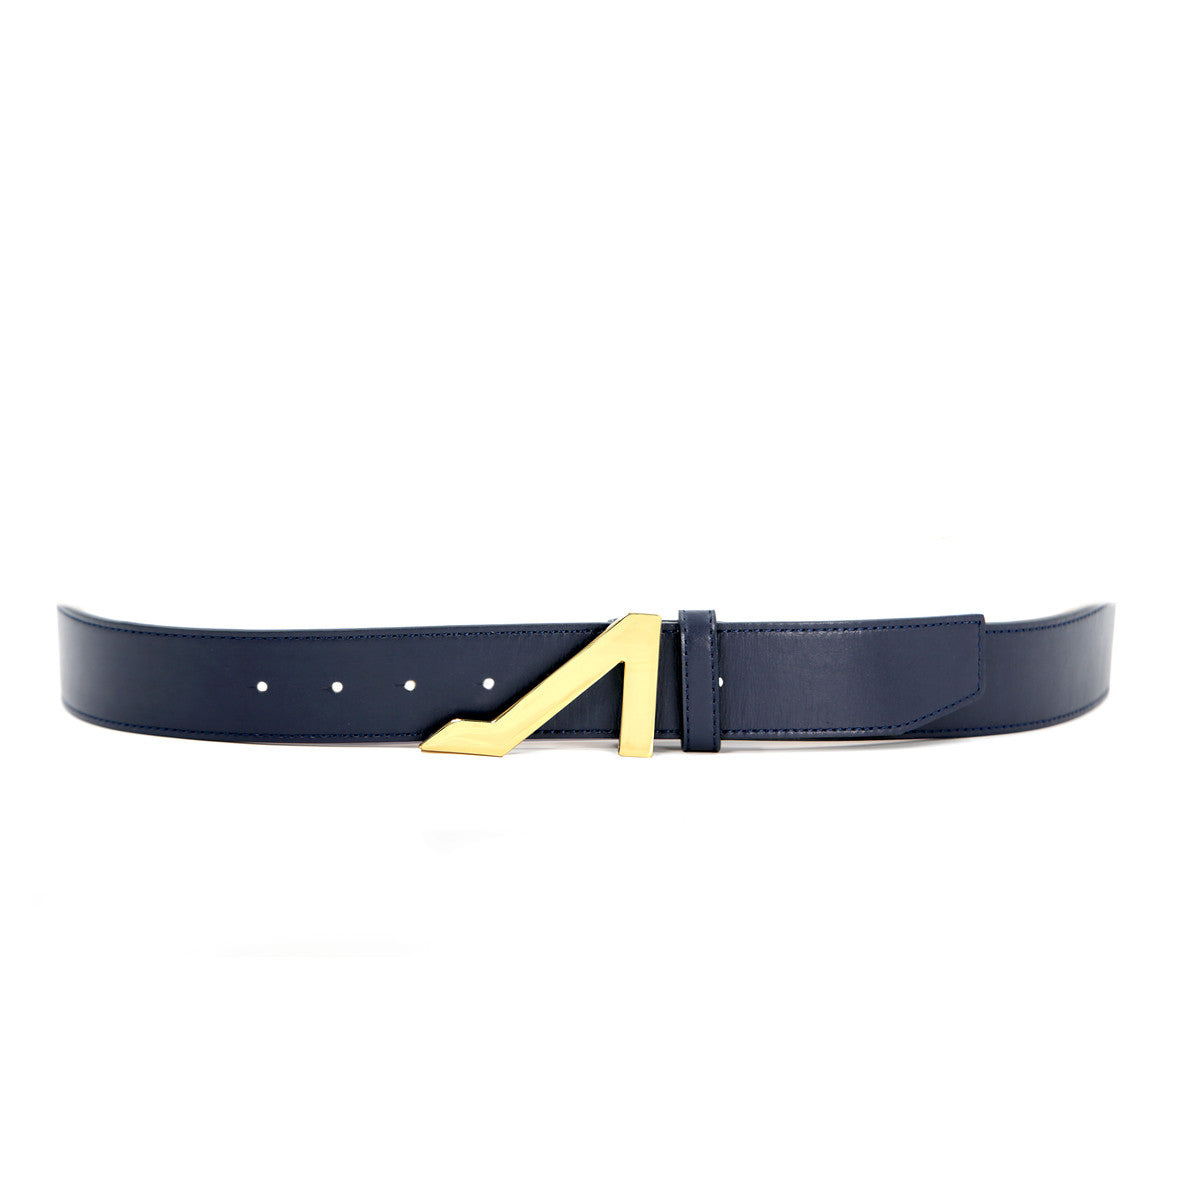 NAVY BLUE with GOLD BUCKLE